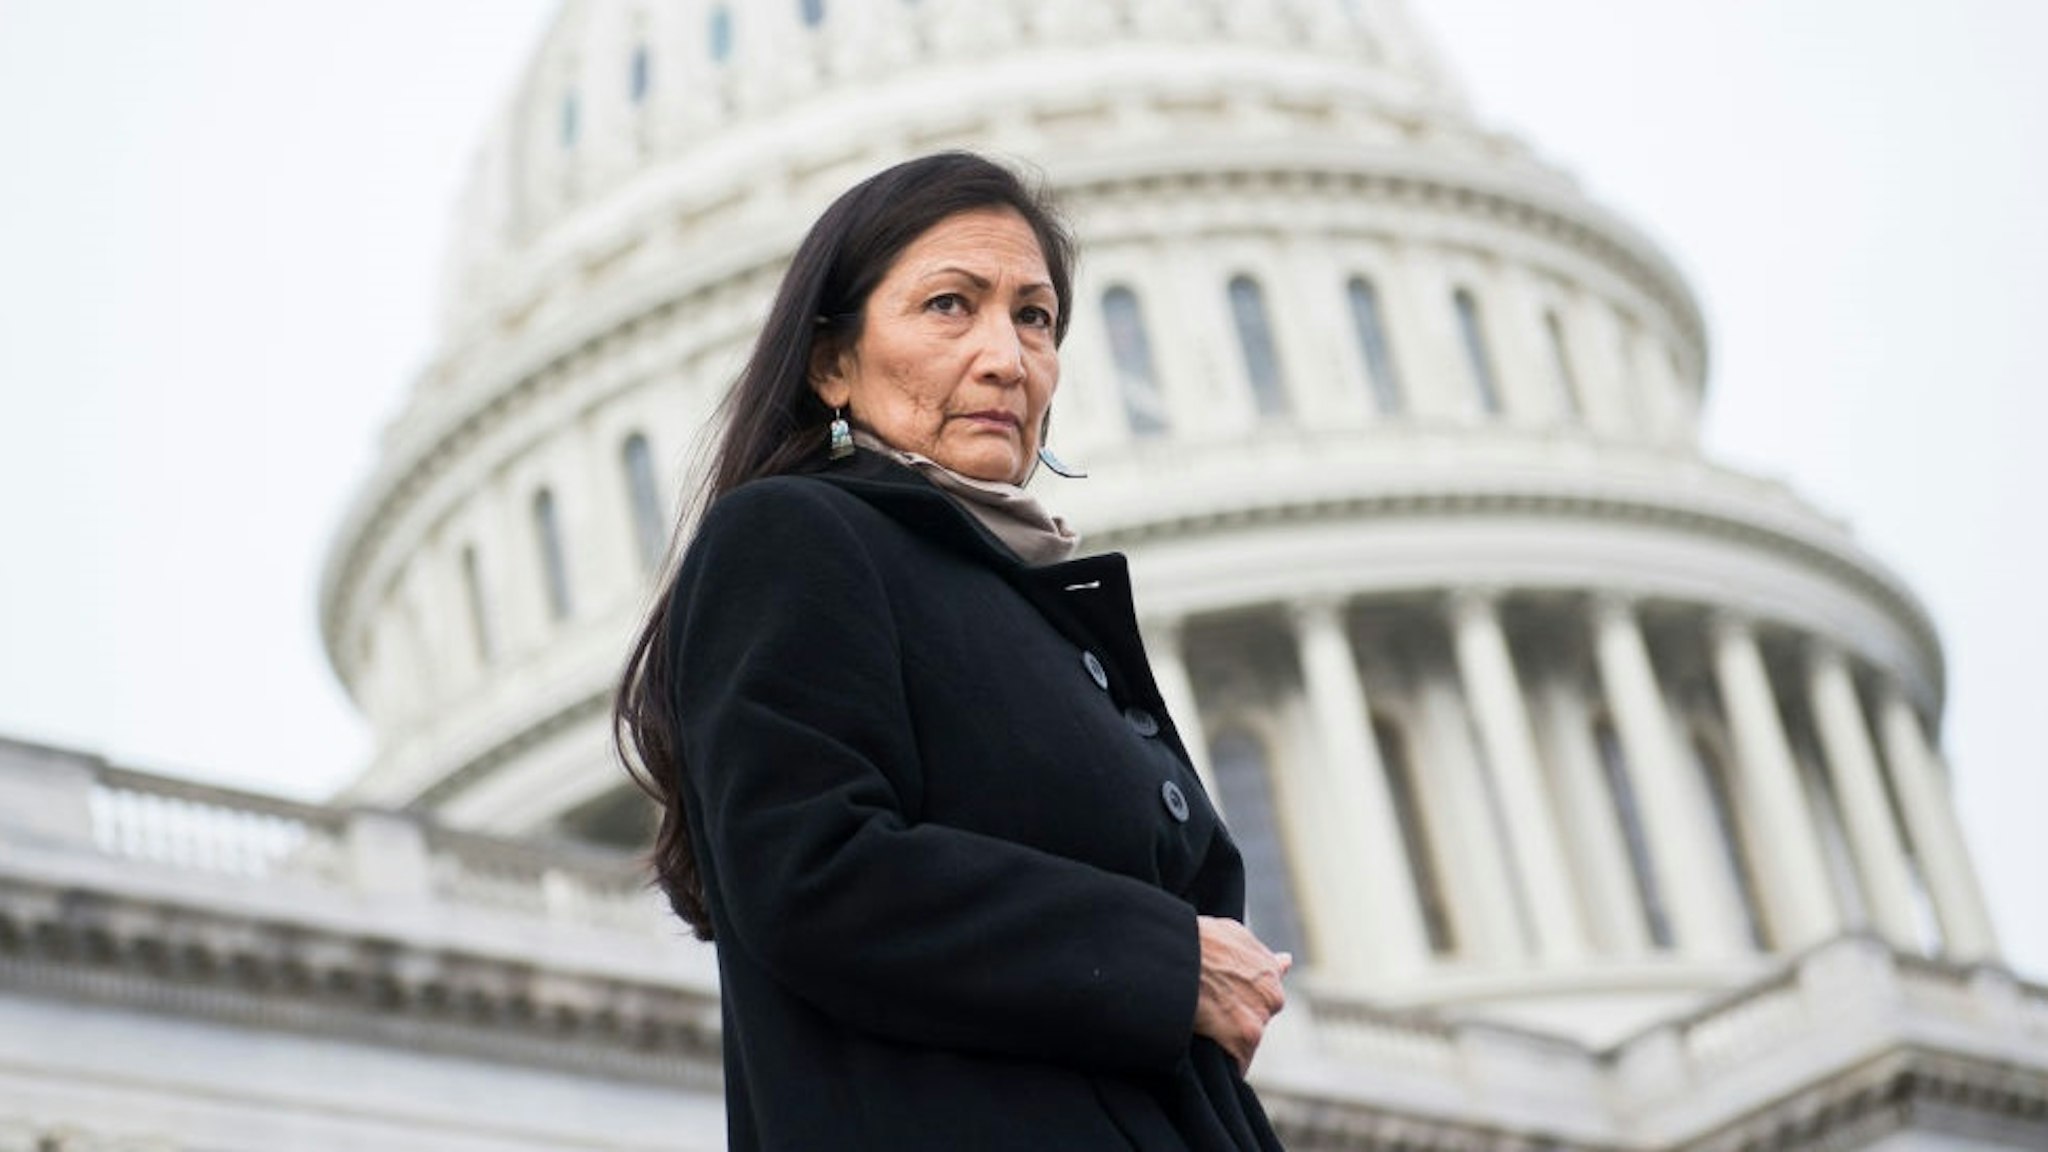 UNITED STATES - JANUARY 04: Rep. Deb Haaland, D-N.M., makes her way to a group photo with Democratic women members of the House on the East Front of the Capitol on January 4, 2019.